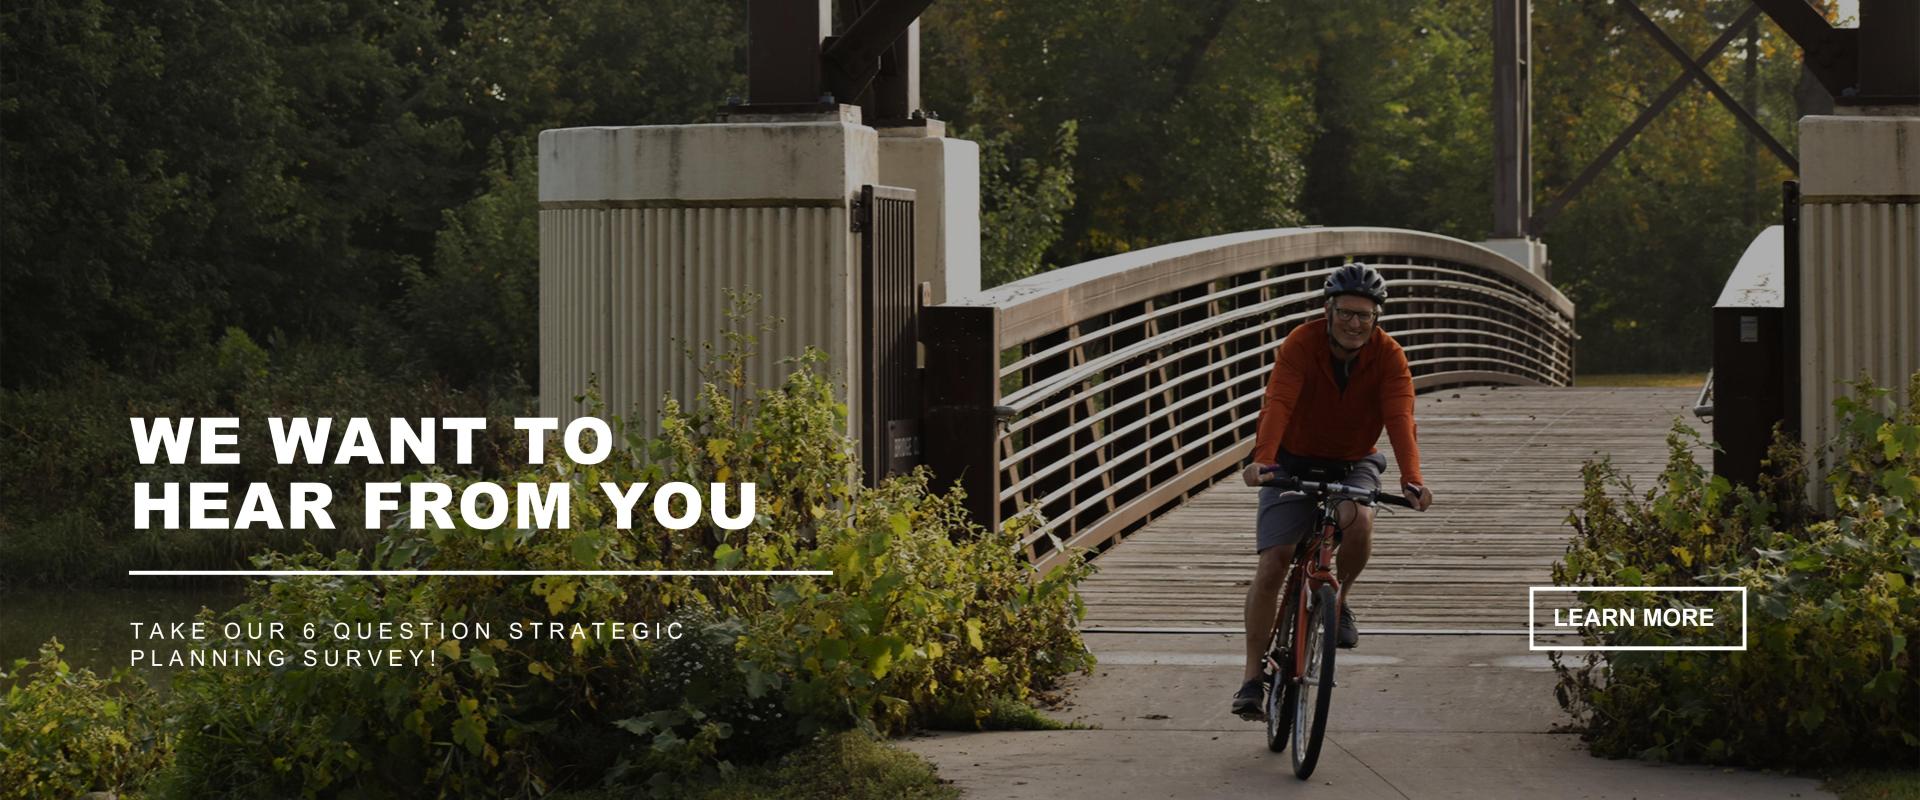 WE WANT TO HEAR FROM YOU - Take our 6 question strategic planning survey - Man on bike, traveling over the Lindenwood bridge with greenery and trees in the background